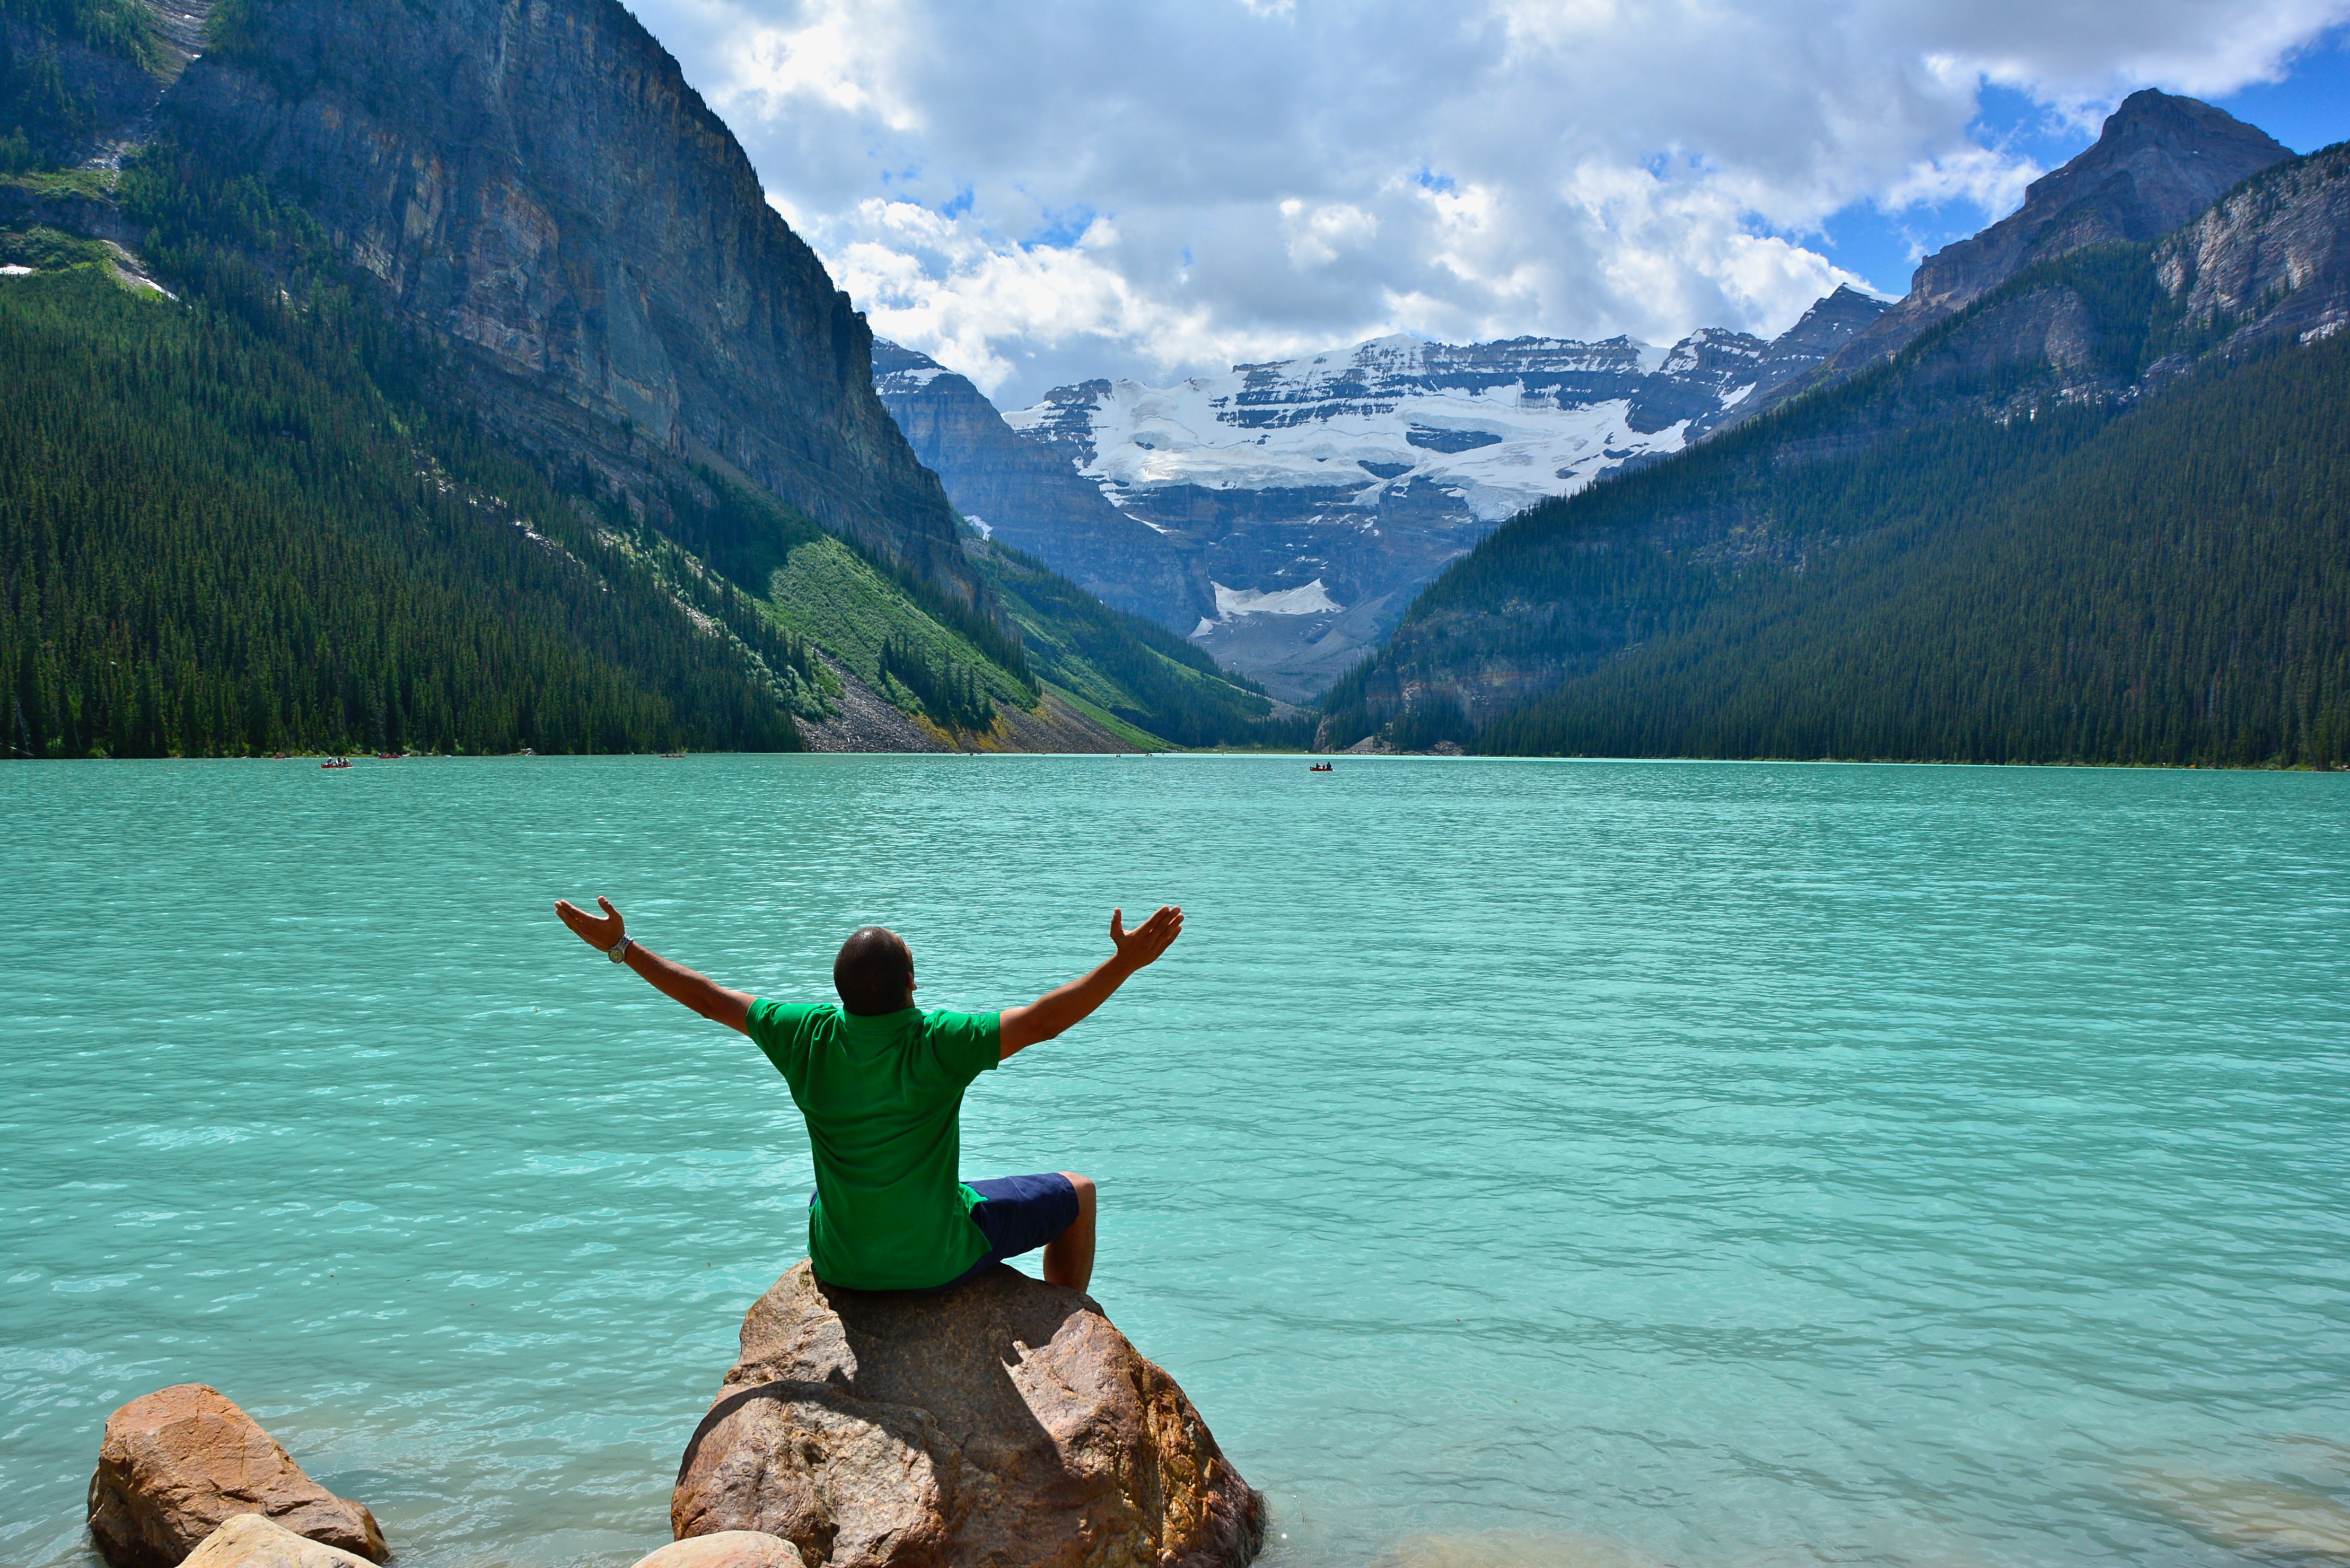 Lake Louise is a place of spiritual beauty. I just happened to take this photo of an unknown person exalting along the shoreline. 